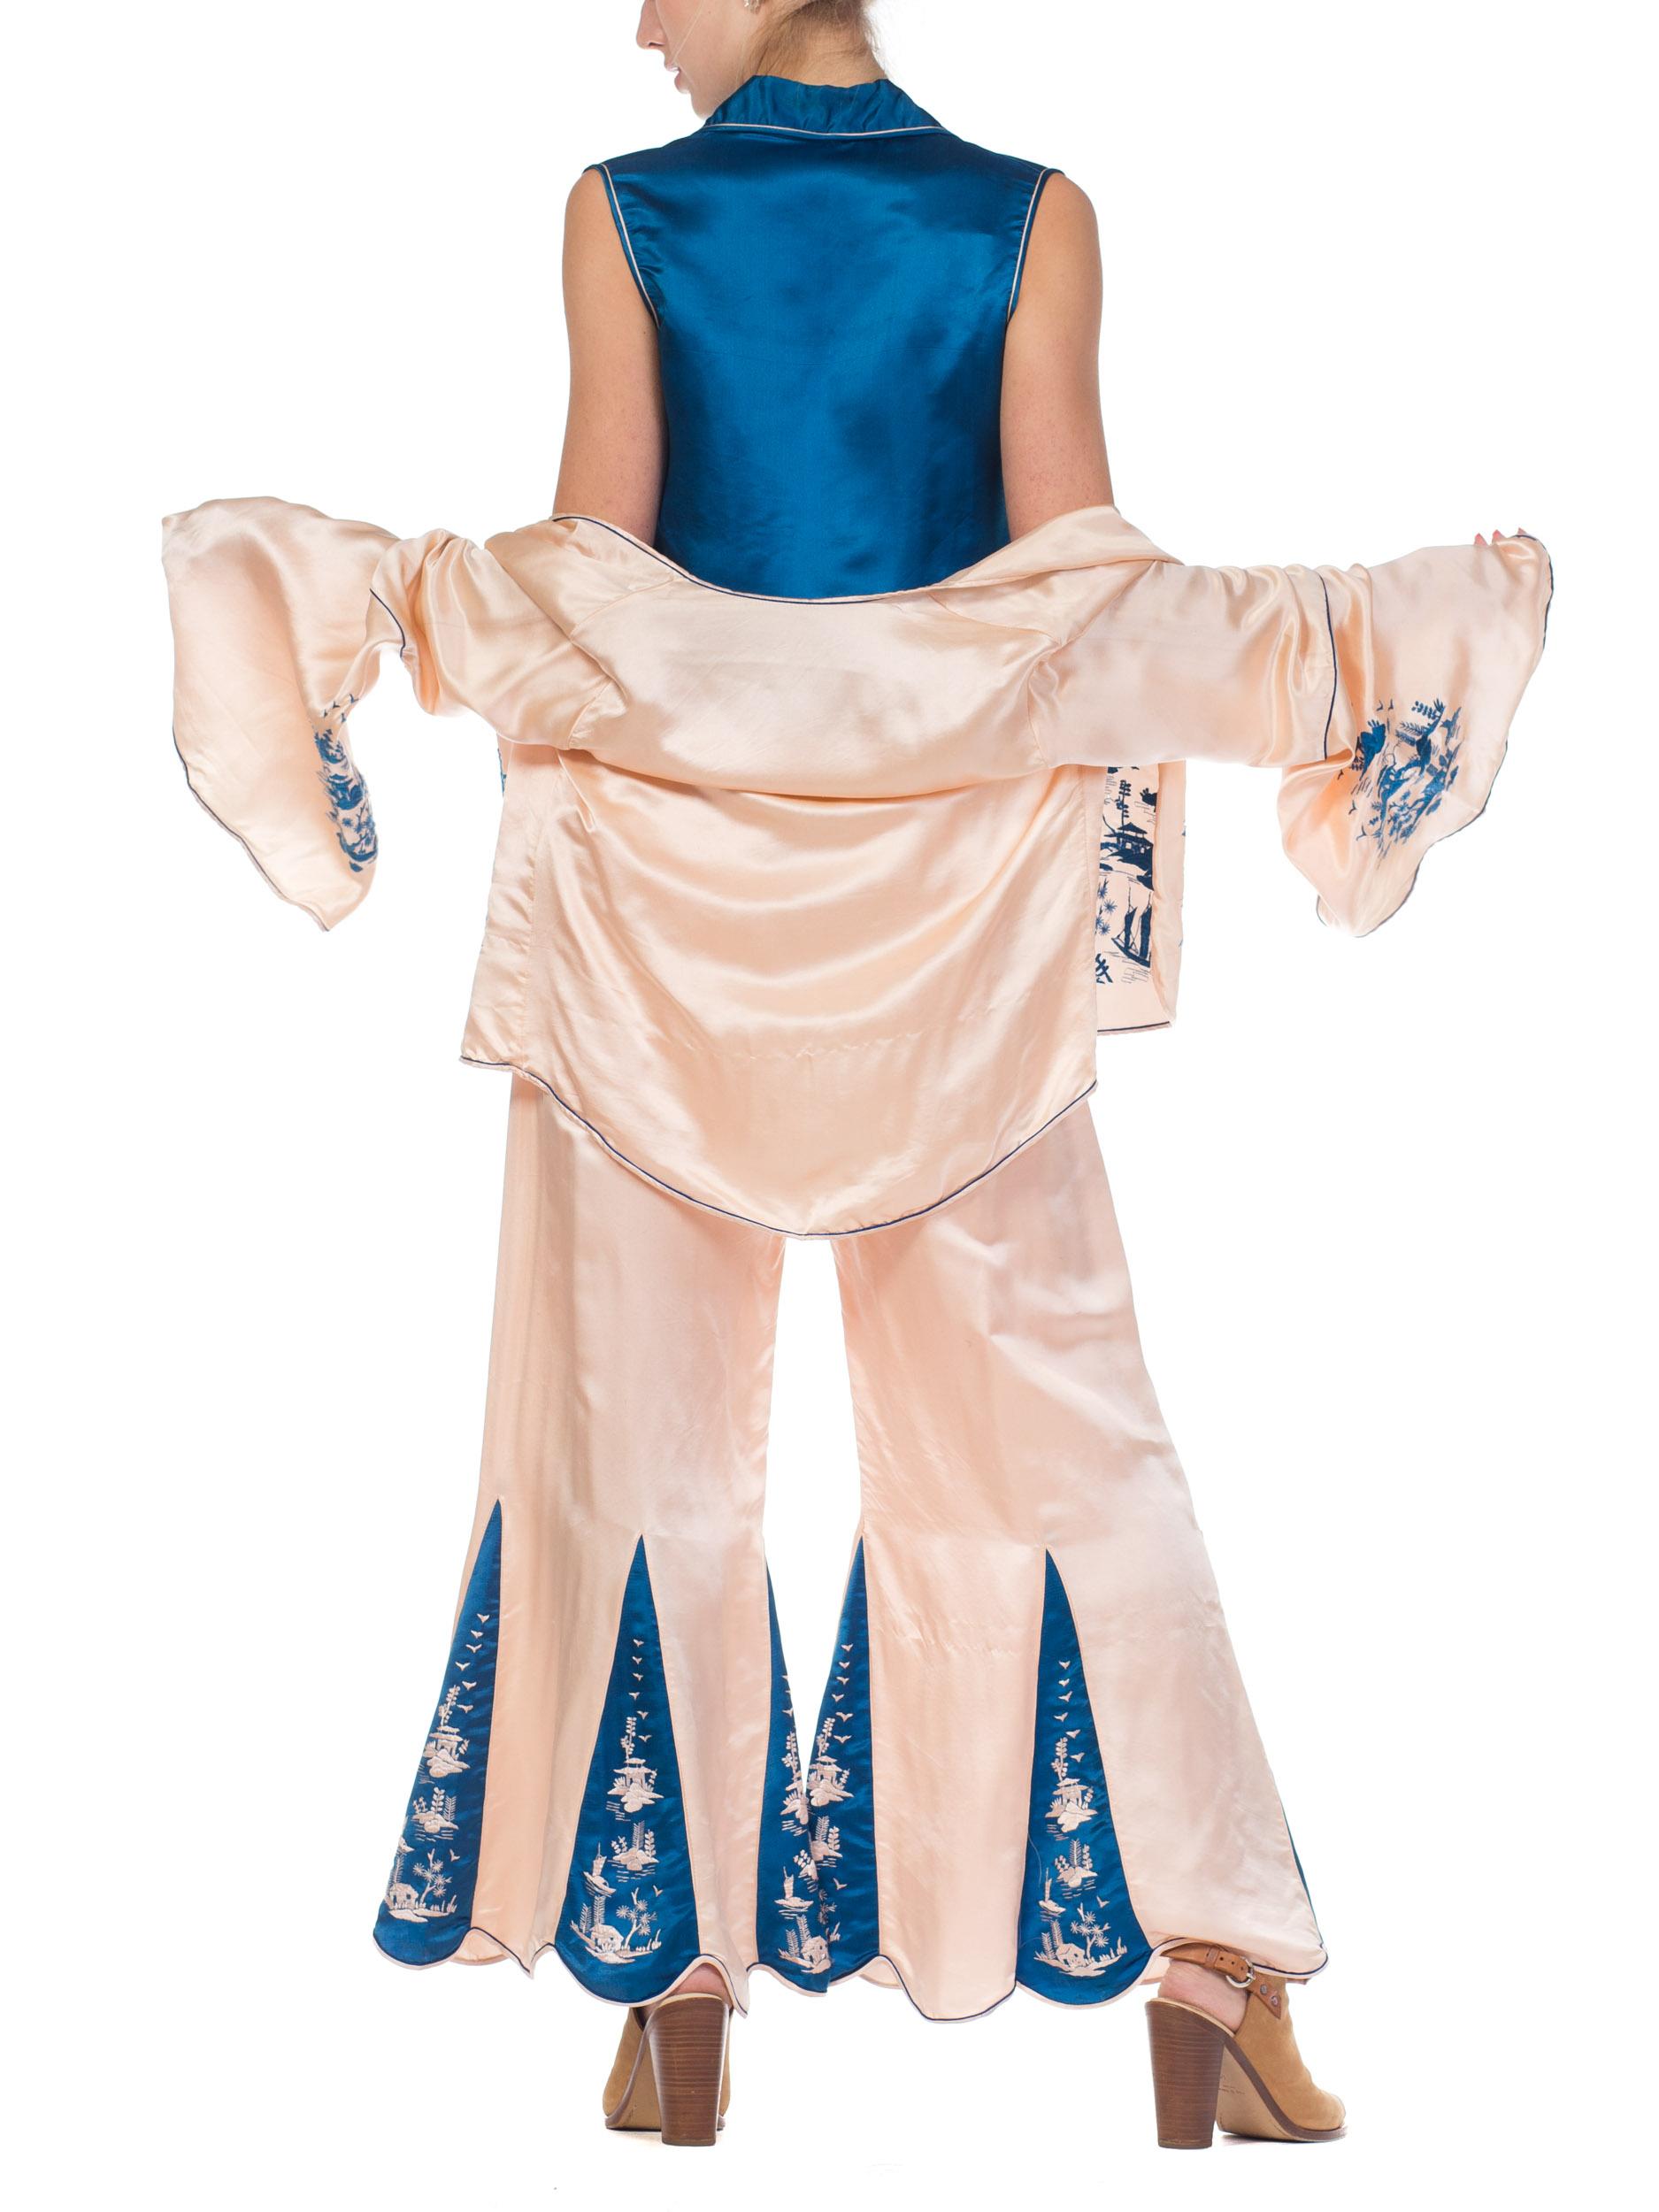 1920s 3 Piece Blue and Cream Chinese Beach Pajamas With Hand Embroidery 12